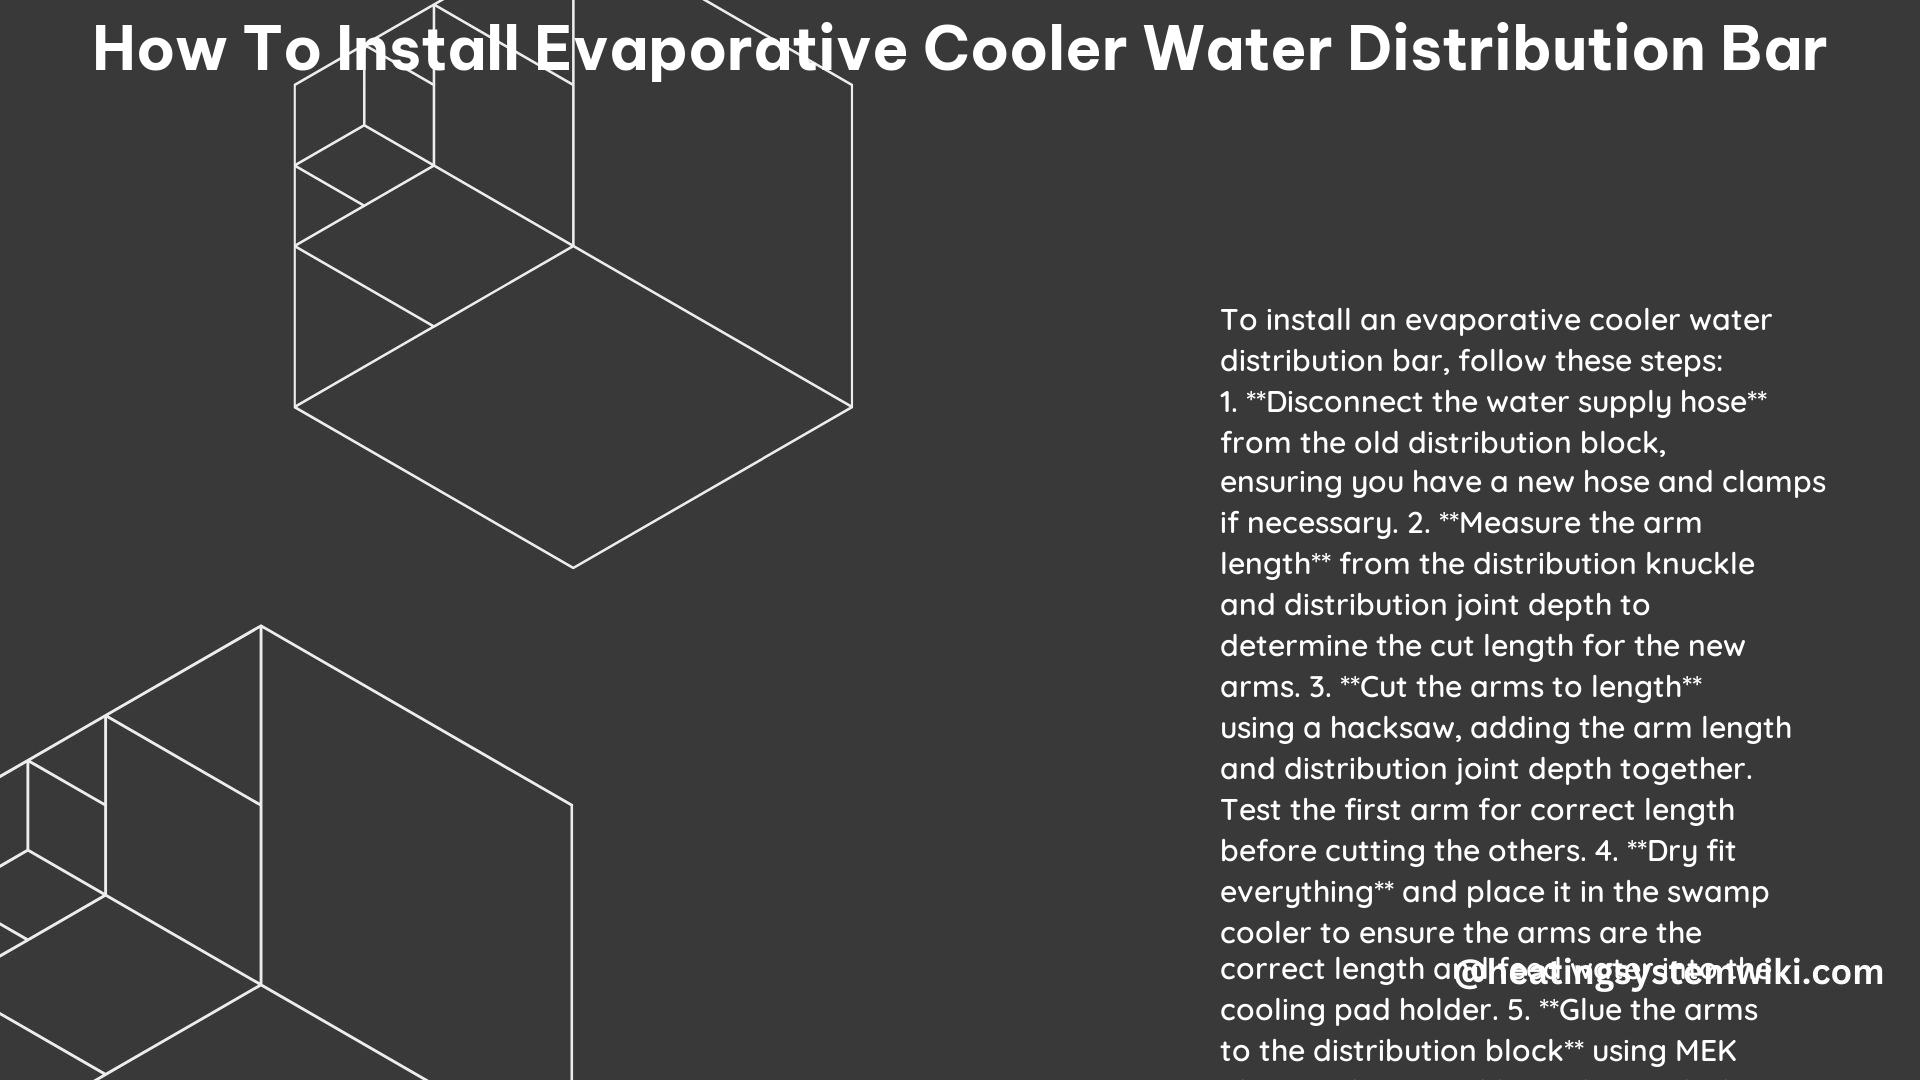 How to Install Evaporative Cooler Water Distribution Bar